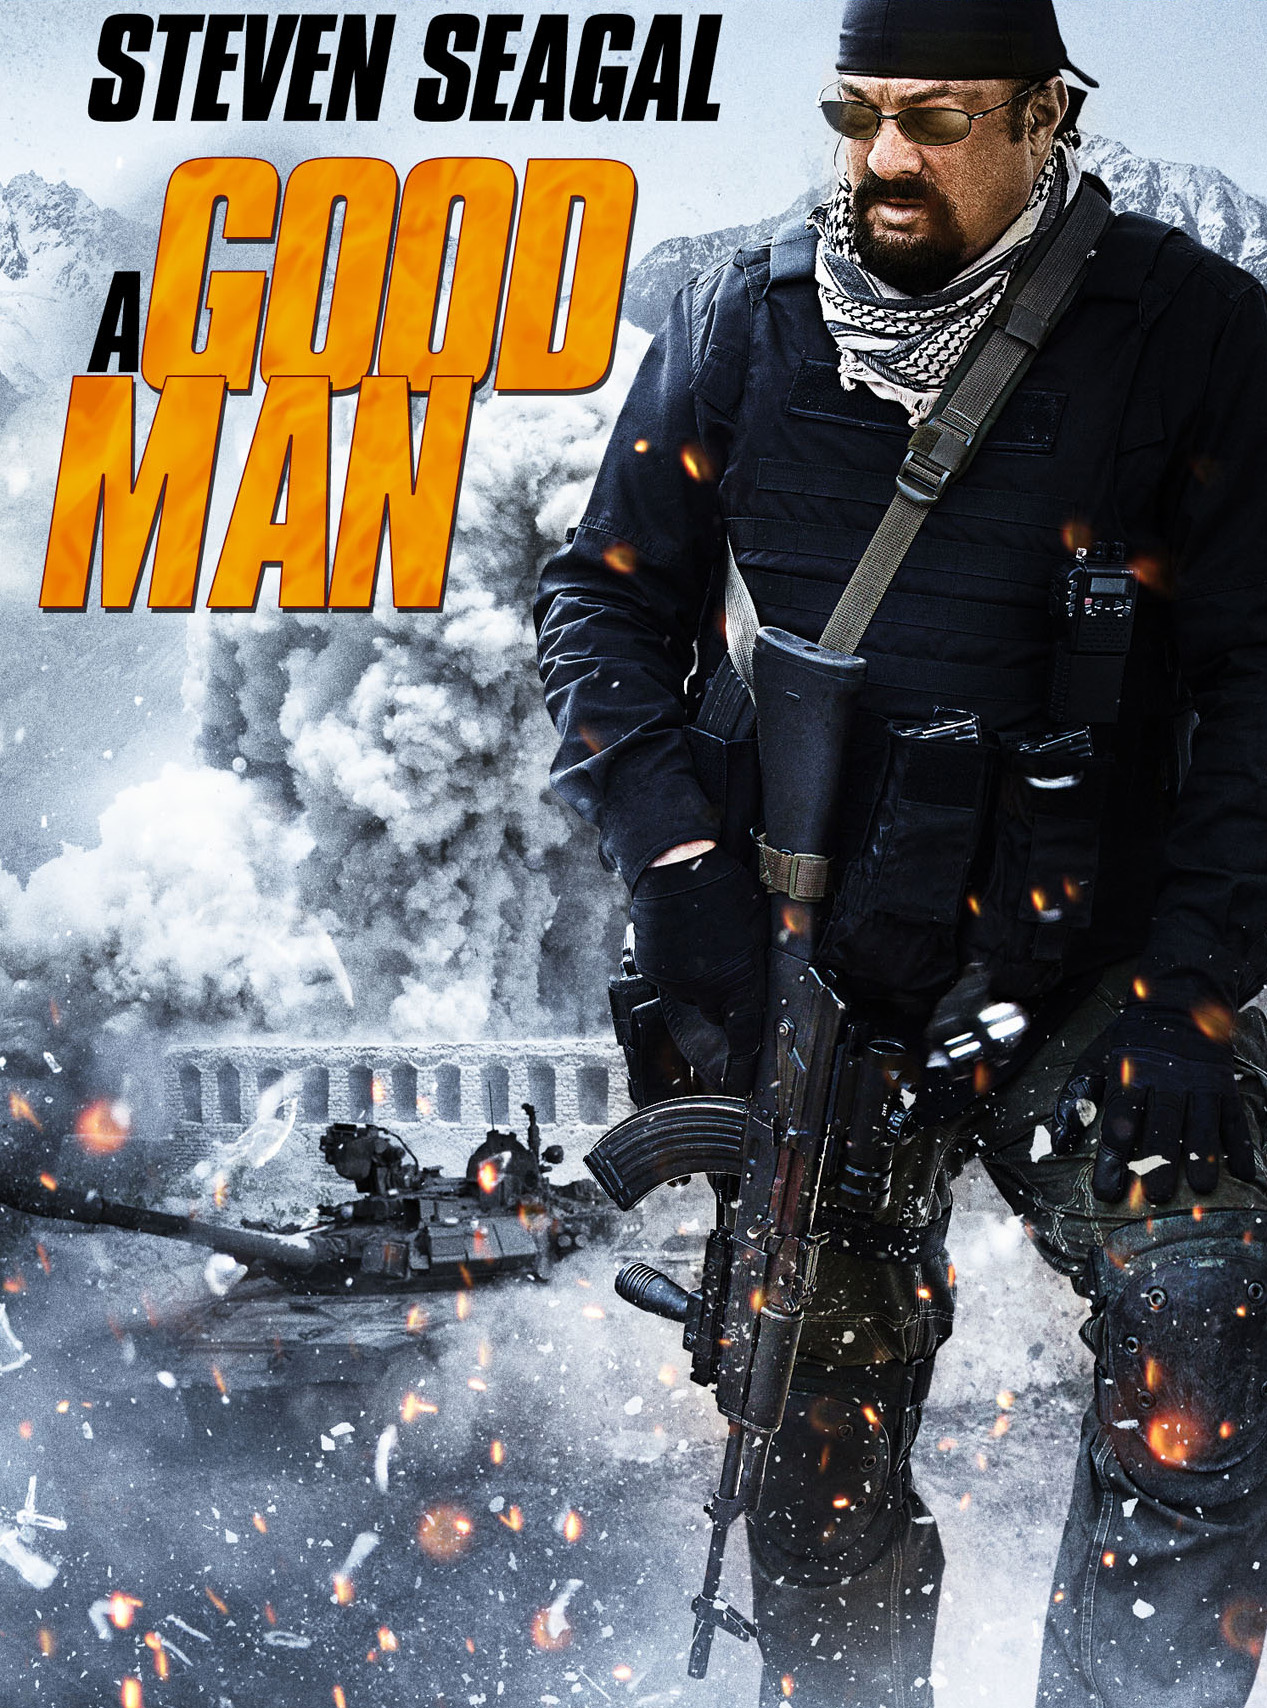 A Good Man (2014) with English Subtitles on DVD on DVD